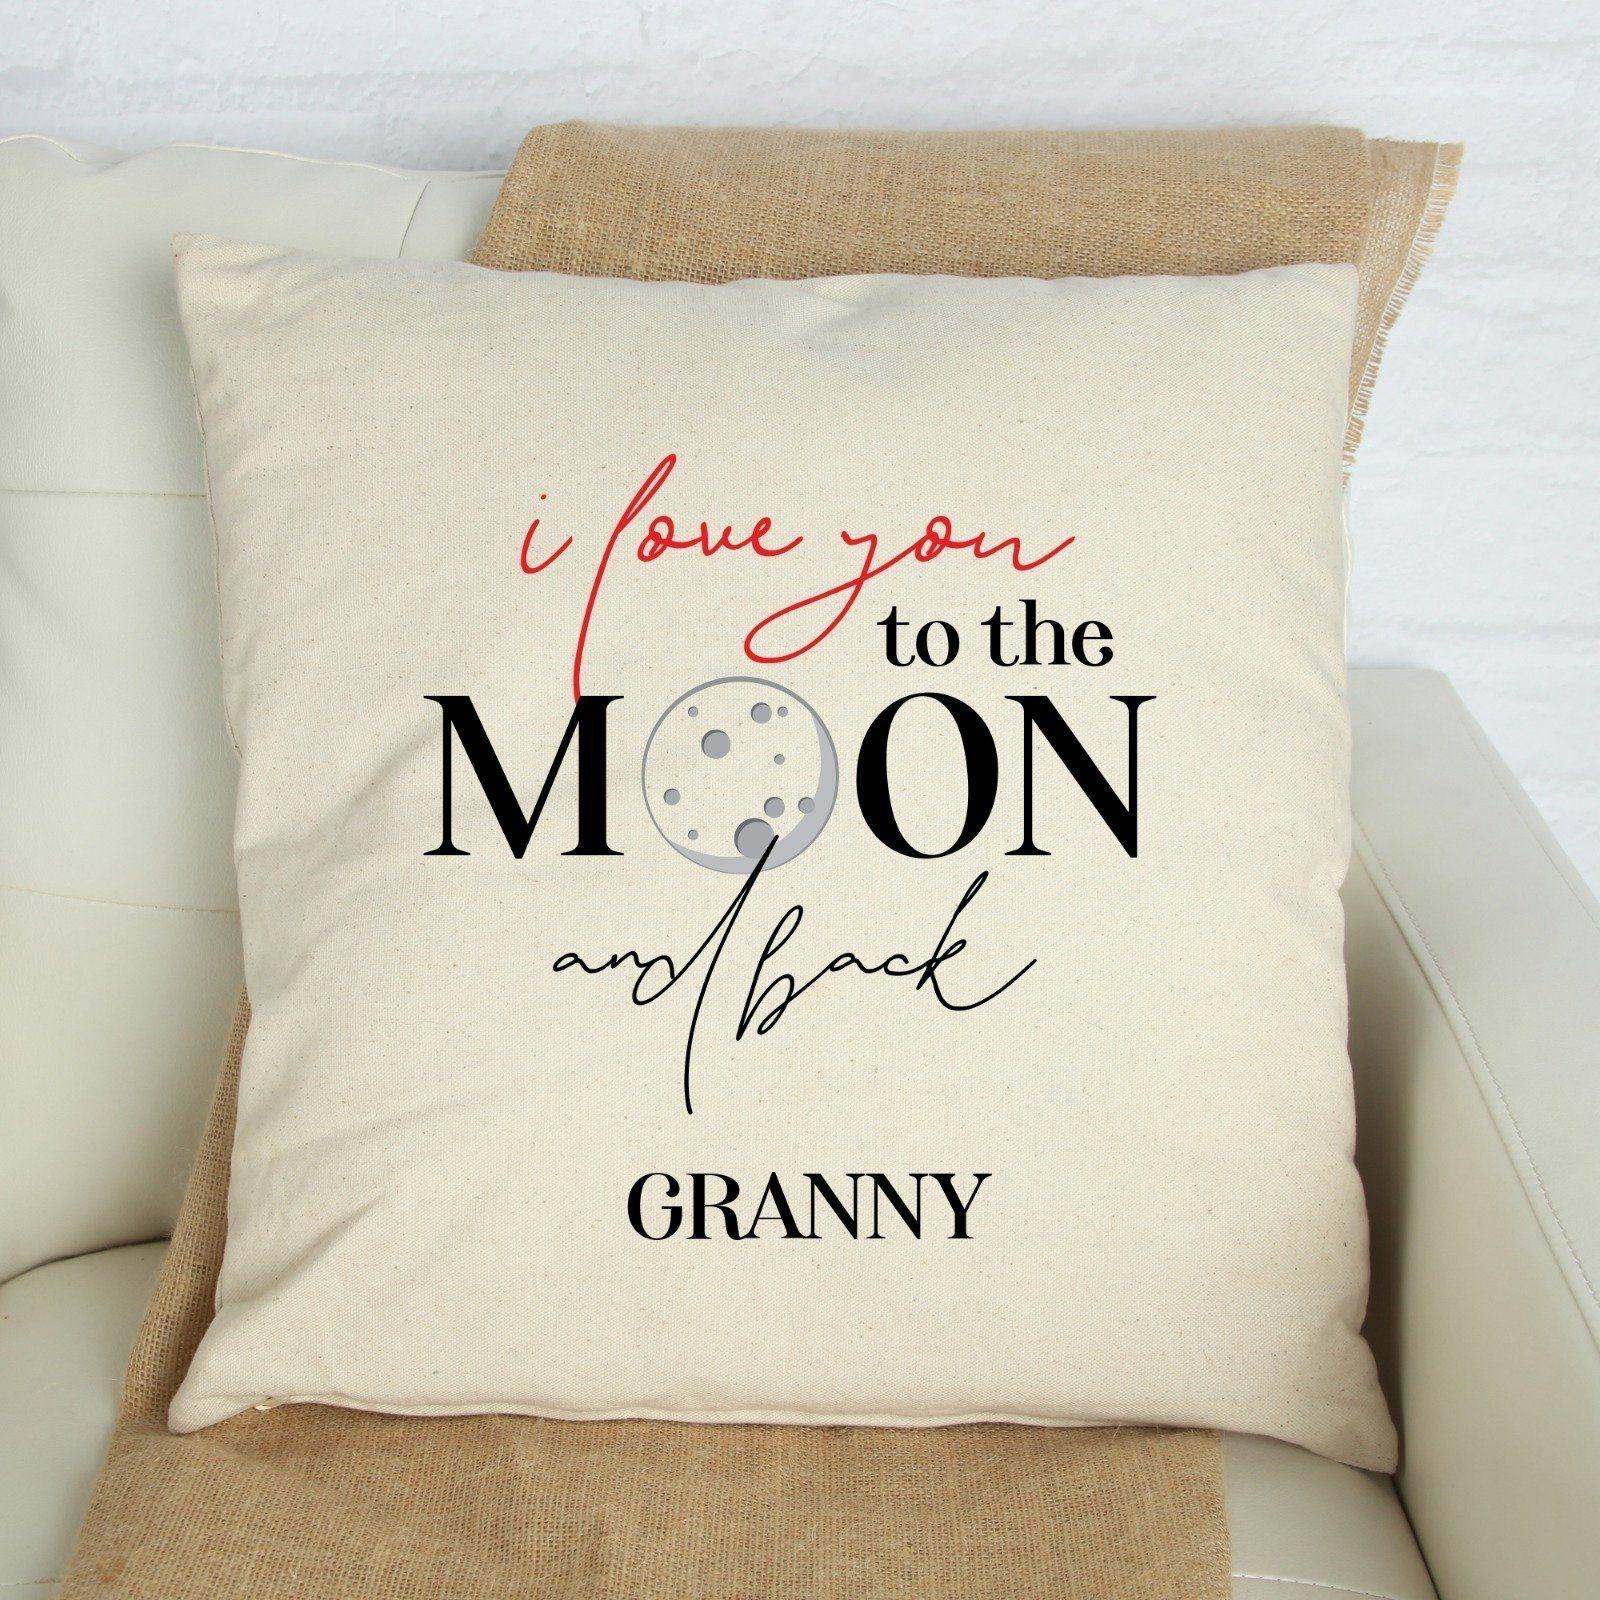 I love you to the moon and back granny cushion cover, Square Pillow Cover